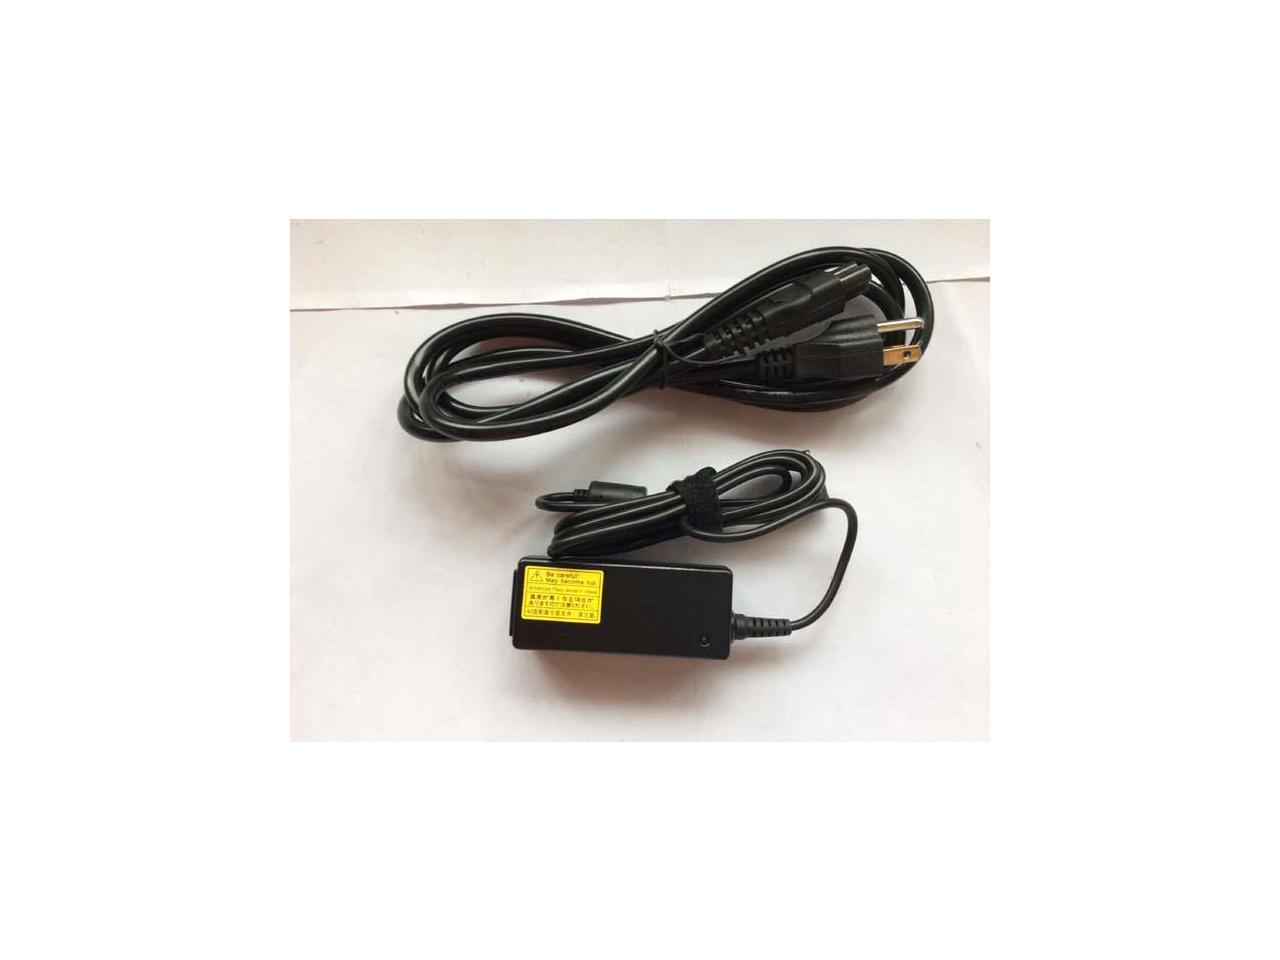 12v 3a Laptop Ac Adapter Power Adapter For Asus Eee Pc 1002 1002h 1002ha Adp 36ehc R Adp 36eh C R Newegg Com